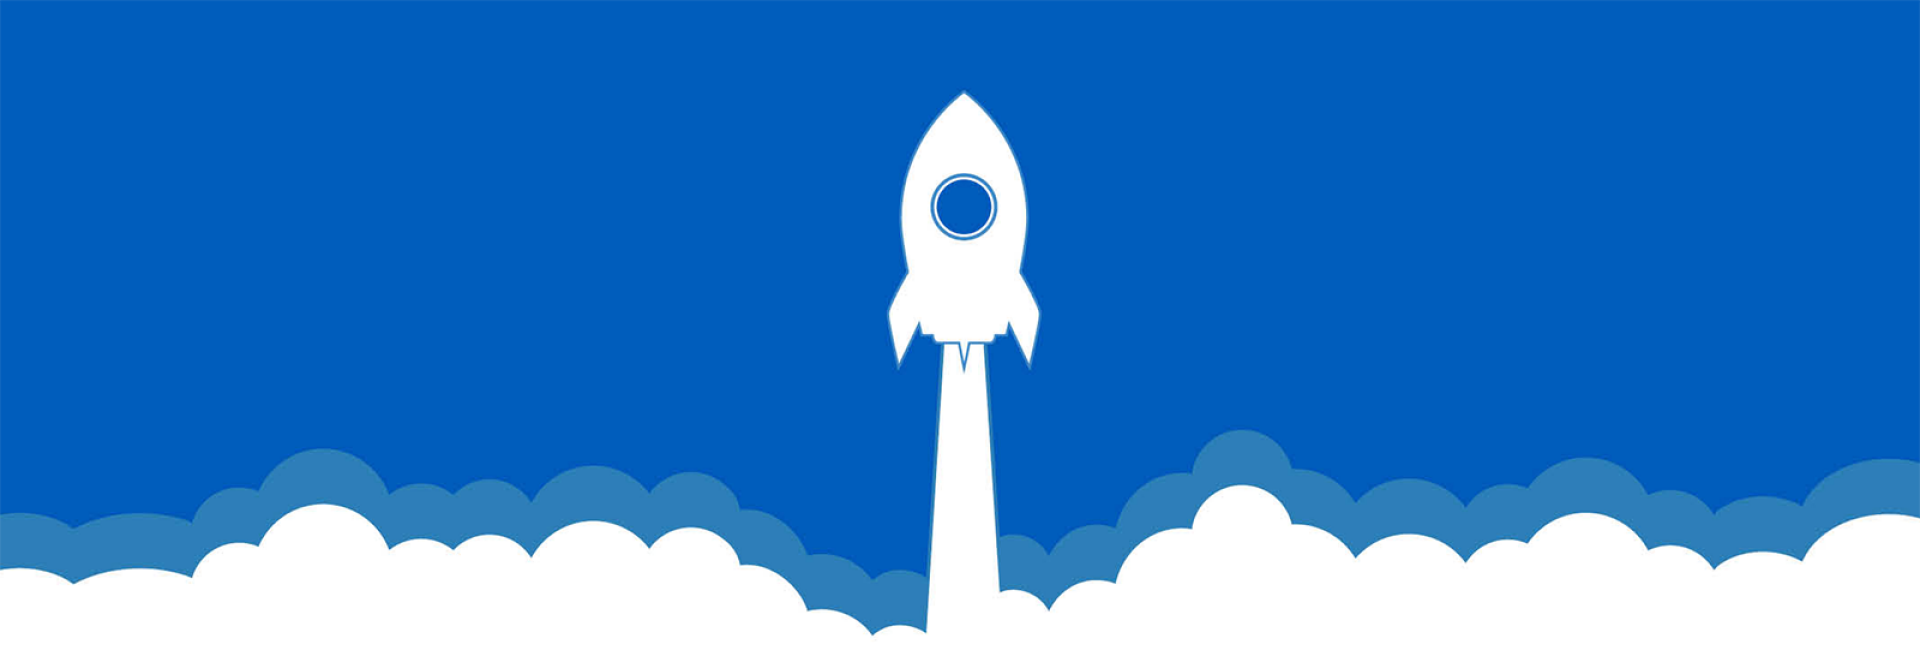 Vector graphic of rocket launching. 